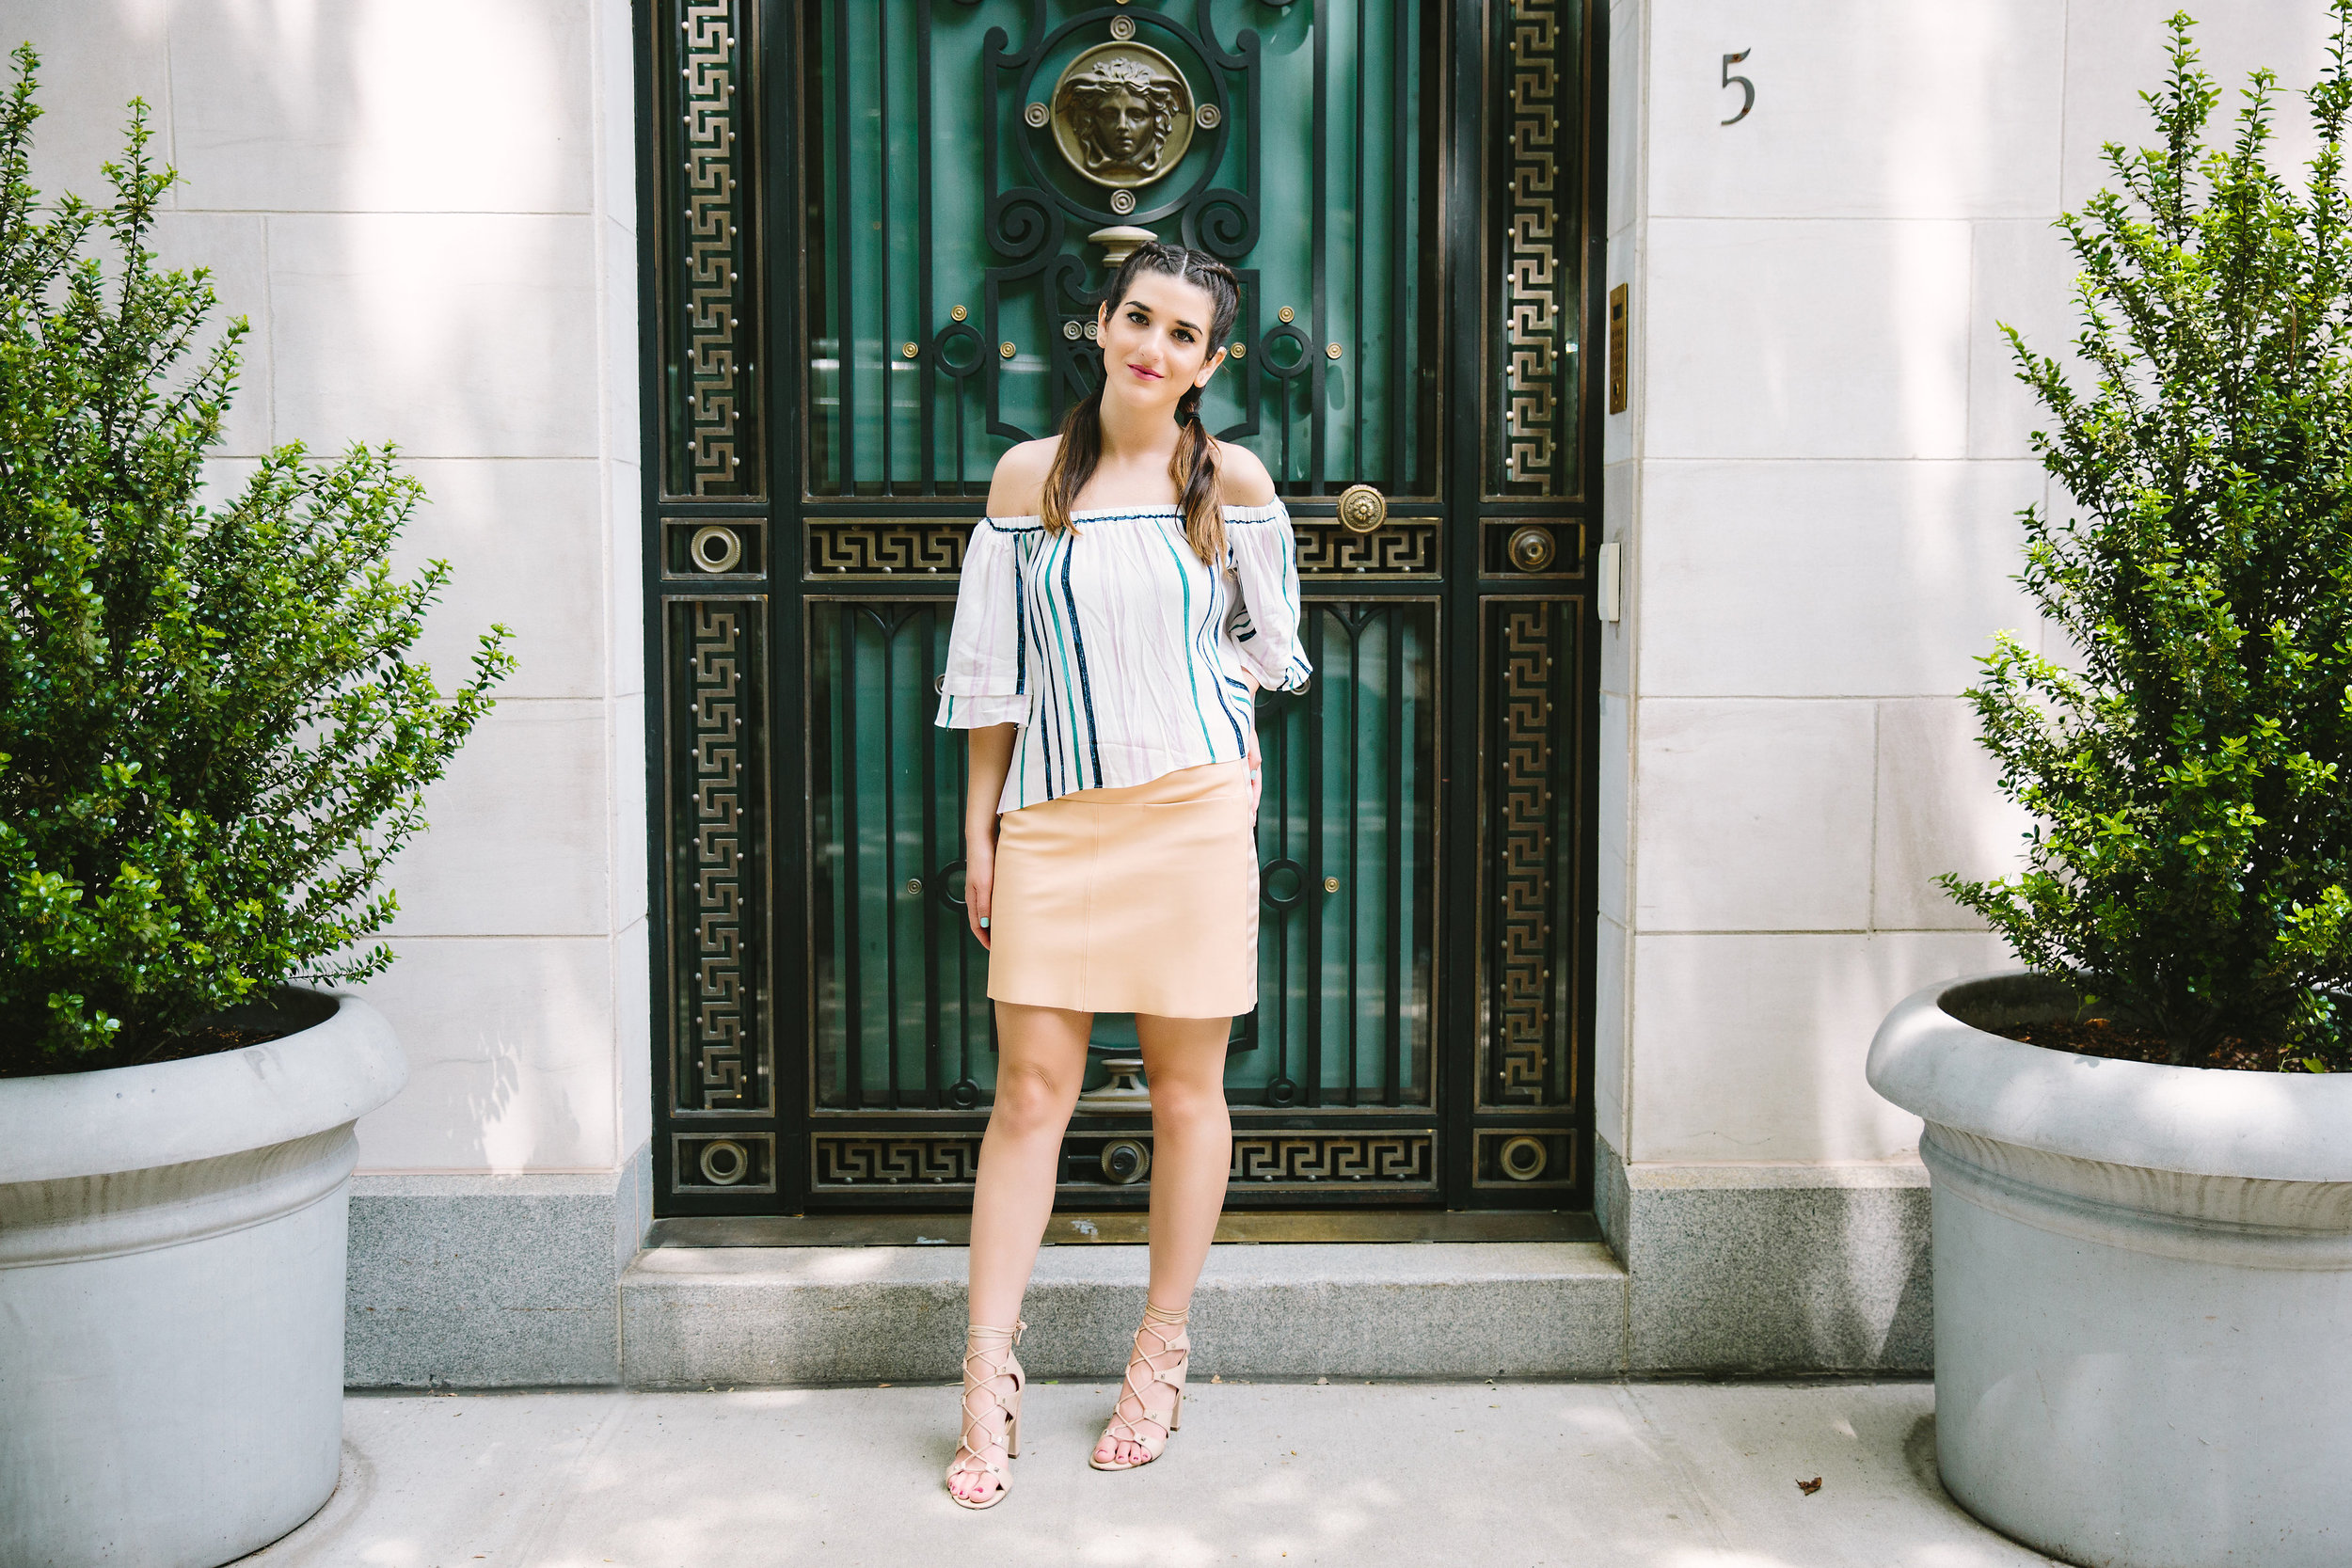 Striped Off-The-Shoulder Shoulder Top Shop Trescool Louboutins & Love Fashion Blog Esther Santer NYC Street Style Blogger Outfit OOTD Mini Skirt Pastel Pink Trendy Ivanka Trump Nude Lace Up Heels Gold Ring Hairstyle Boxer Braid Photoshoot Inspo Summer.jpg